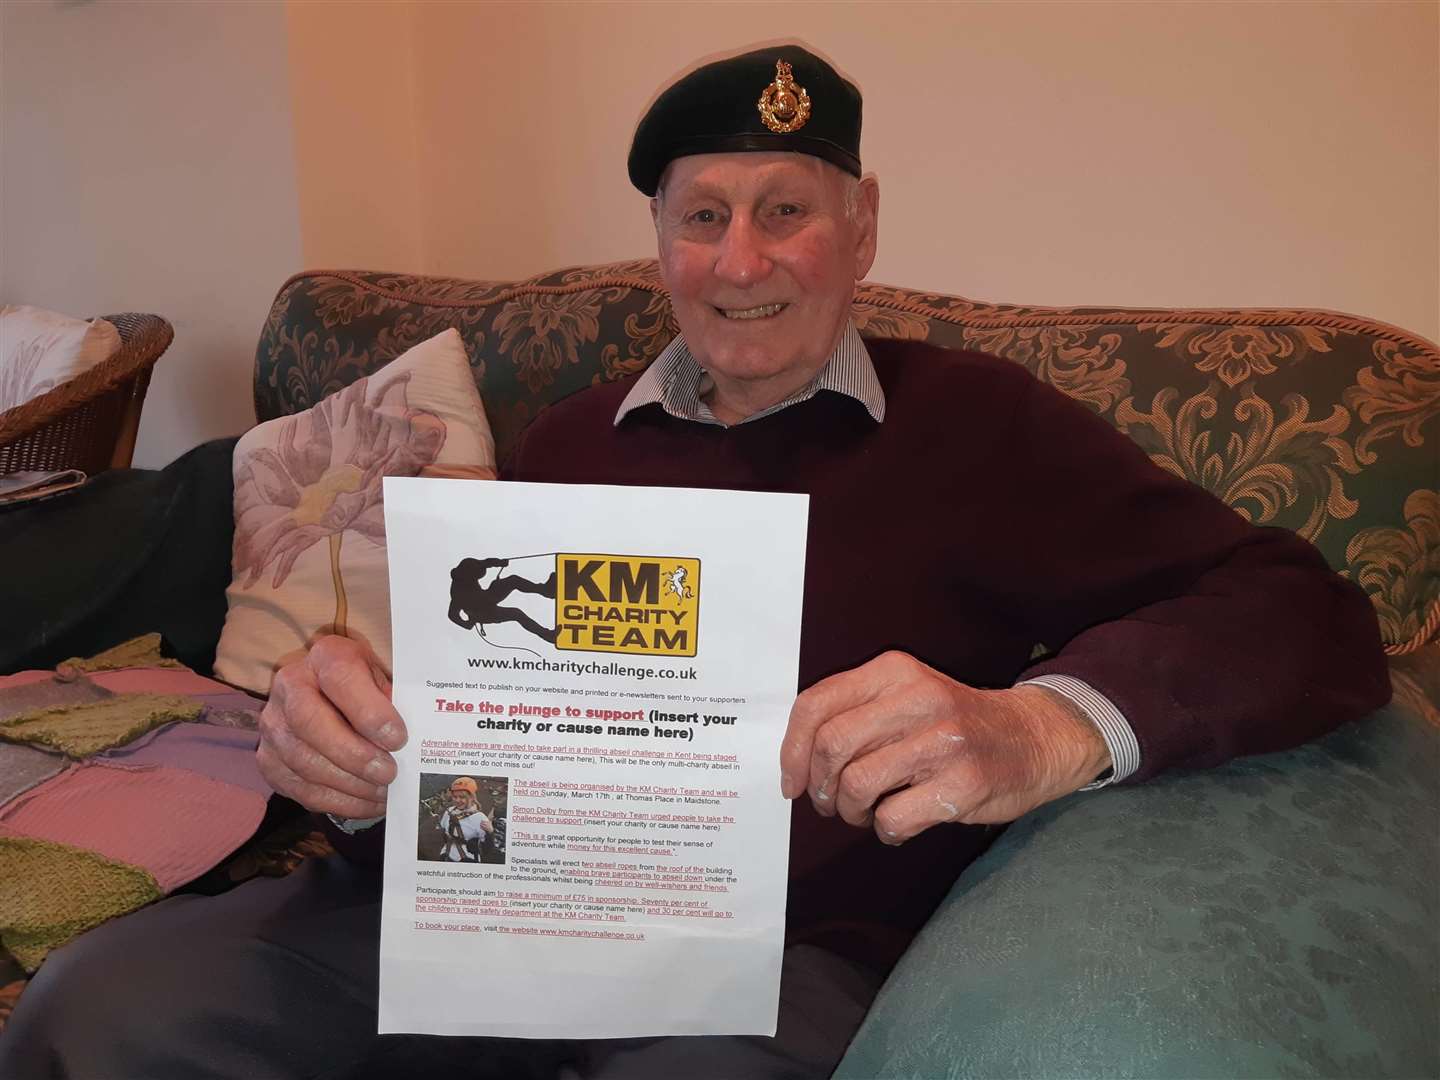 Albert Tweddle is taking part in the KM Charity Team abseil at the age of 82